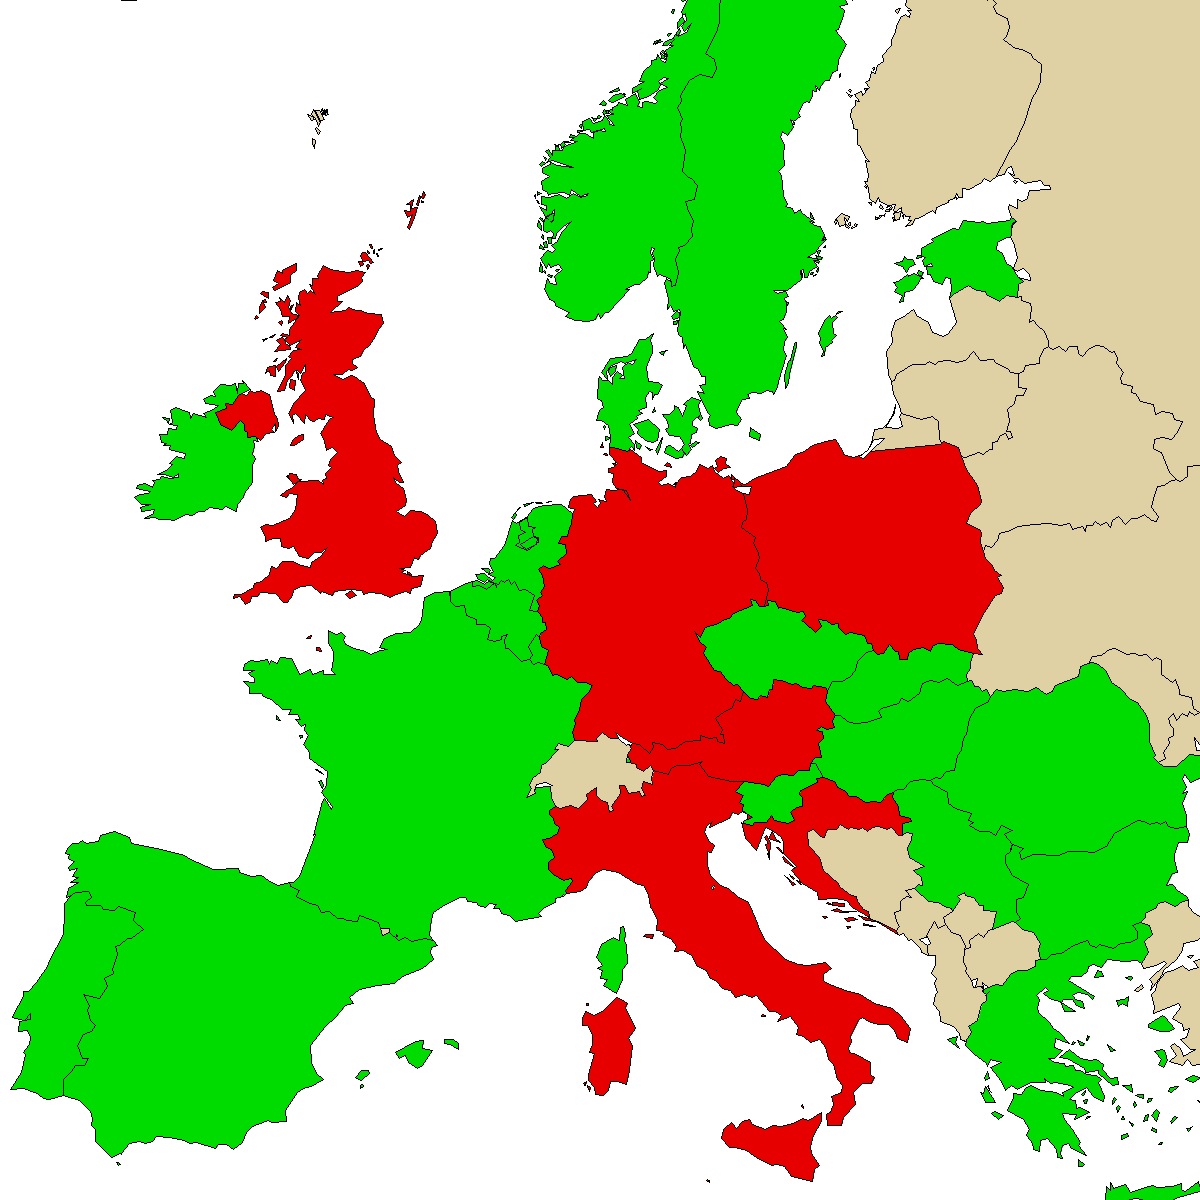 legal info map for our product 2FPM, green are countries with no ban, red with ban, grey is unknown